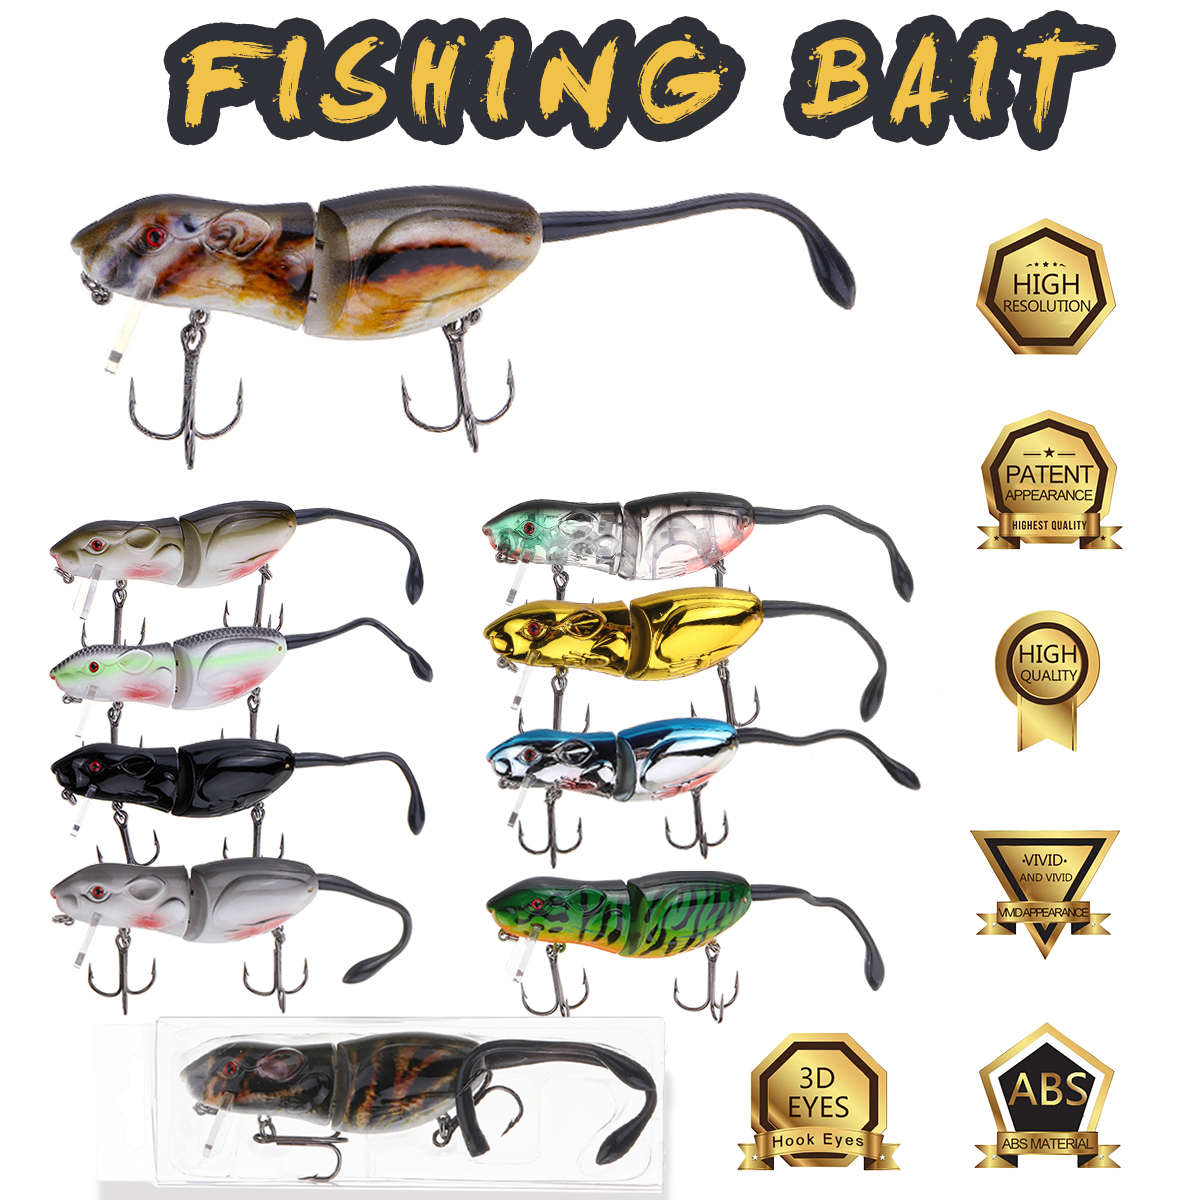 ZANLURE-1PC-16CM-45g-3D-Eyes-Mice-Rat-Shape-Lure-Artificial-Fishing-Bait-With-2-Hooks-Fishing-Tackle-1646066-2